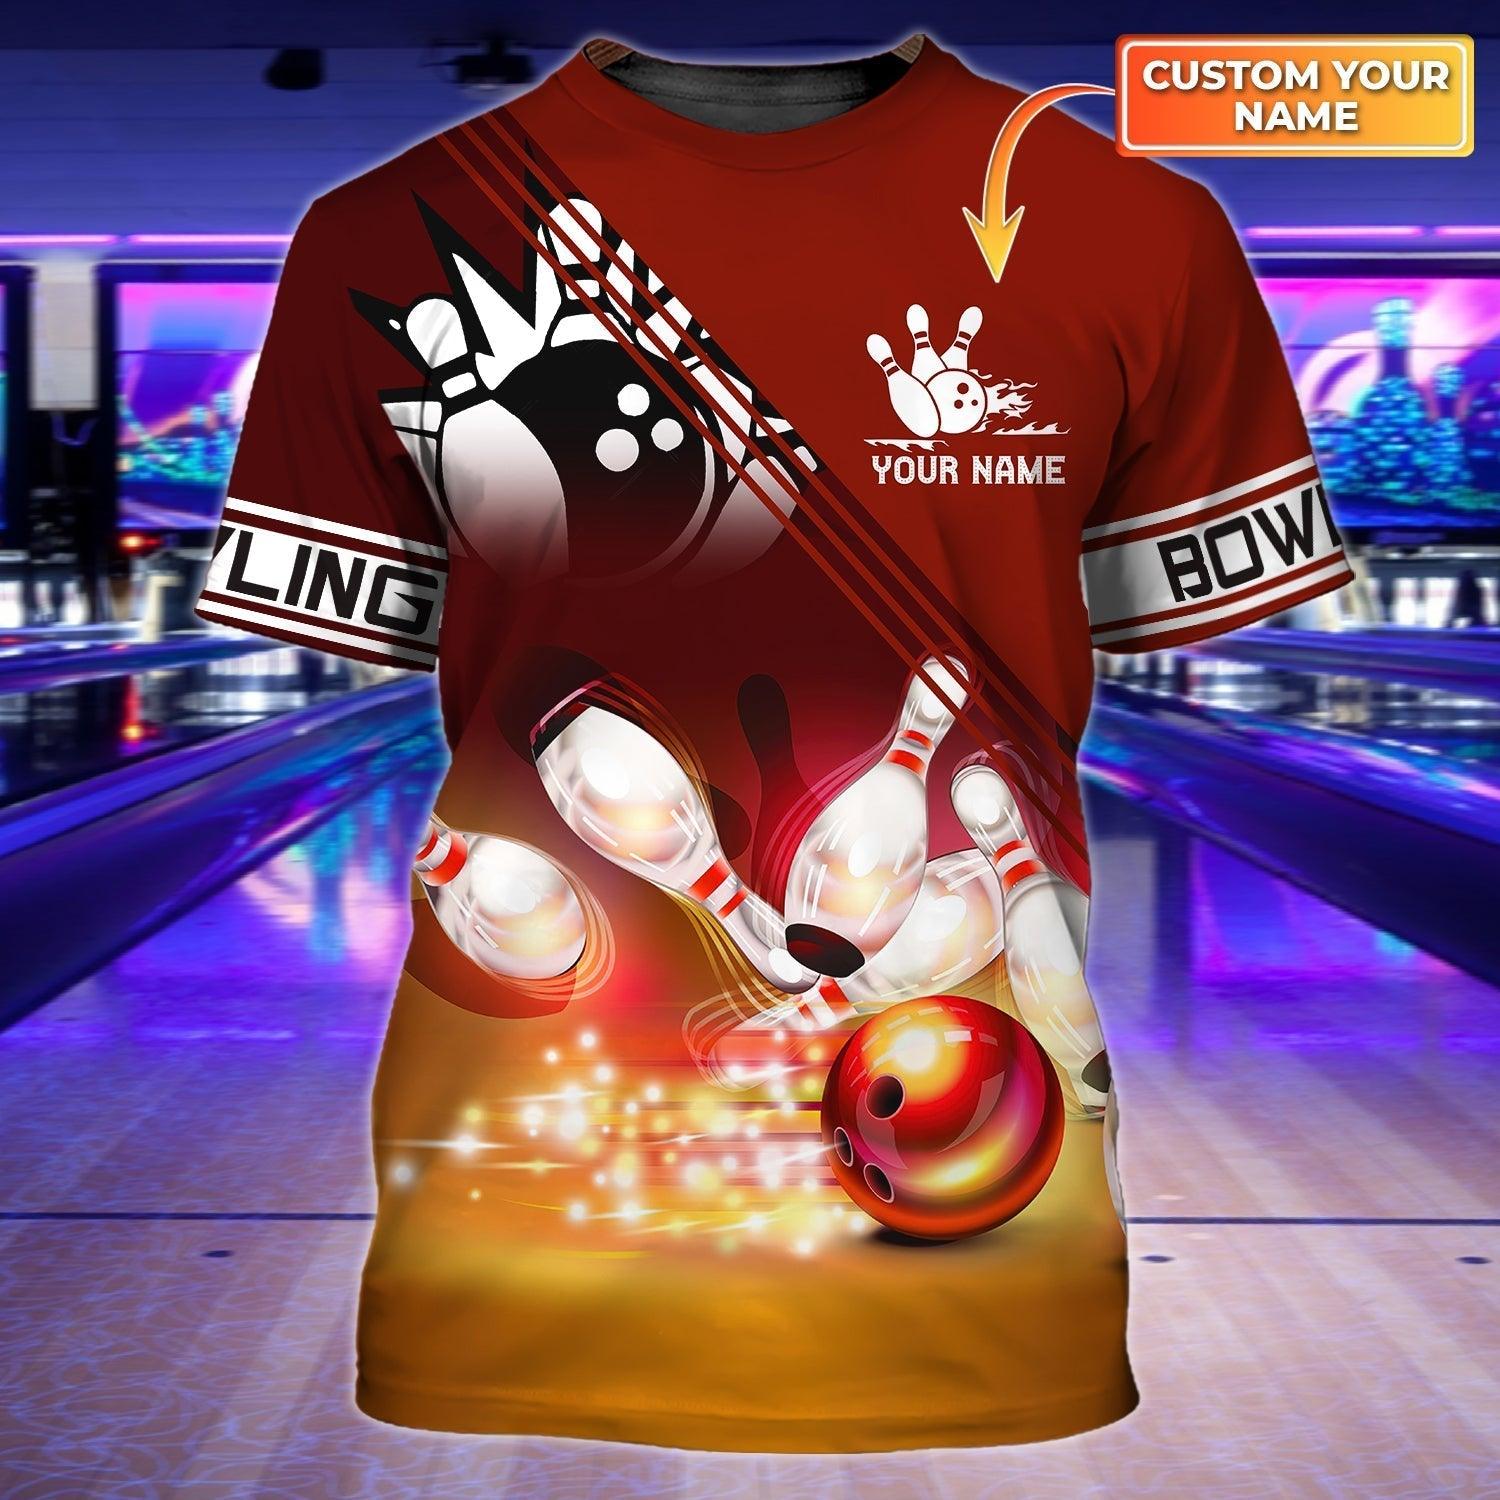 Personalized Bowling Shirt For Men, Custom Name Bowling Shirt For Men, Bowling Team Gift - Perfect Gift For Bowling Lovers, Bowlers - Amzanimalsgift